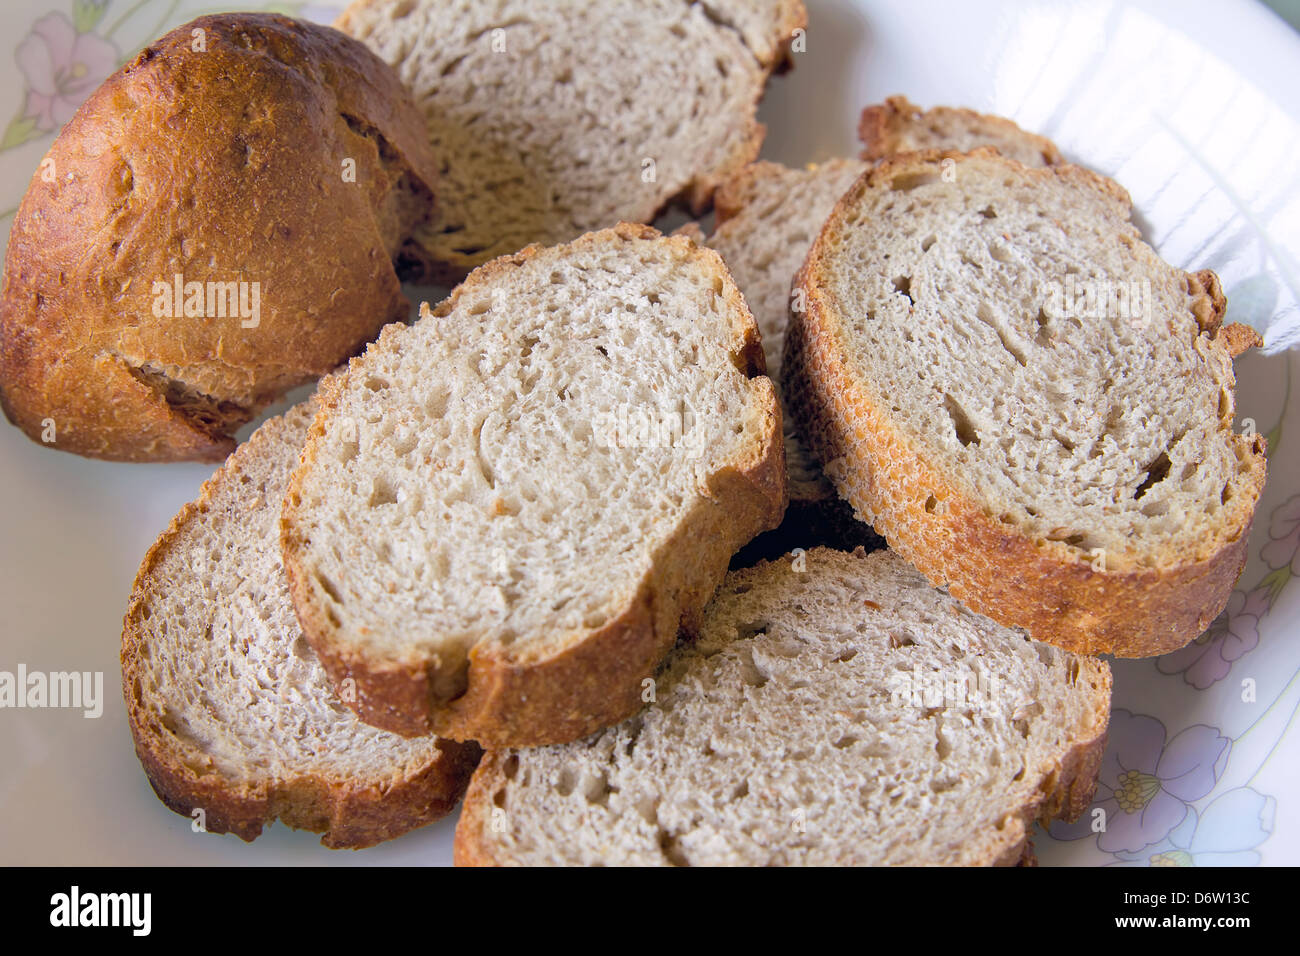 Sliced Sour Dough Whole Wheat French Bread on a Plate Stock Photo